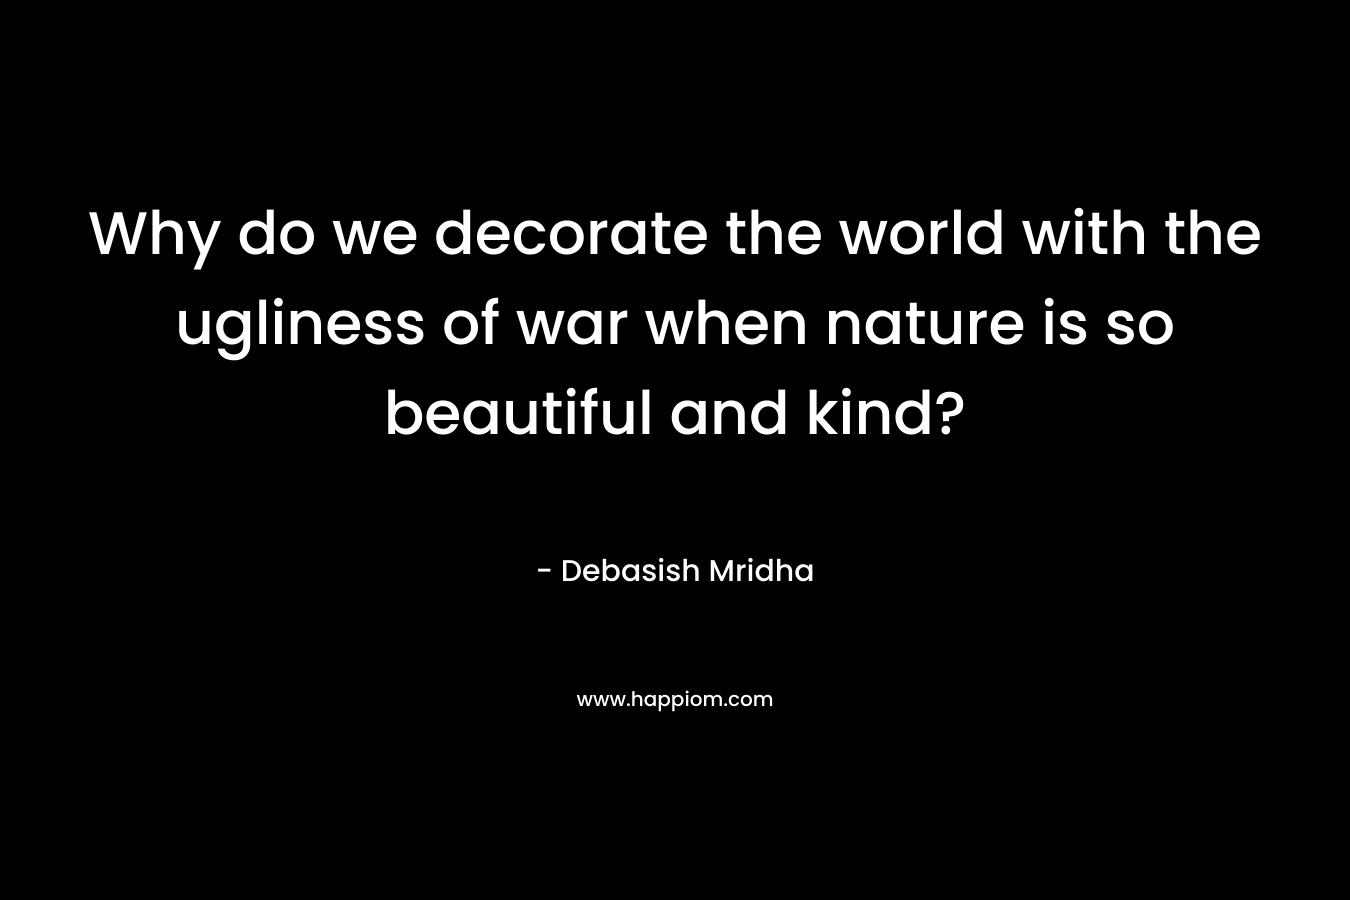 Why do we decorate the world with the ugliness of war when nature is so beautiful and kind?